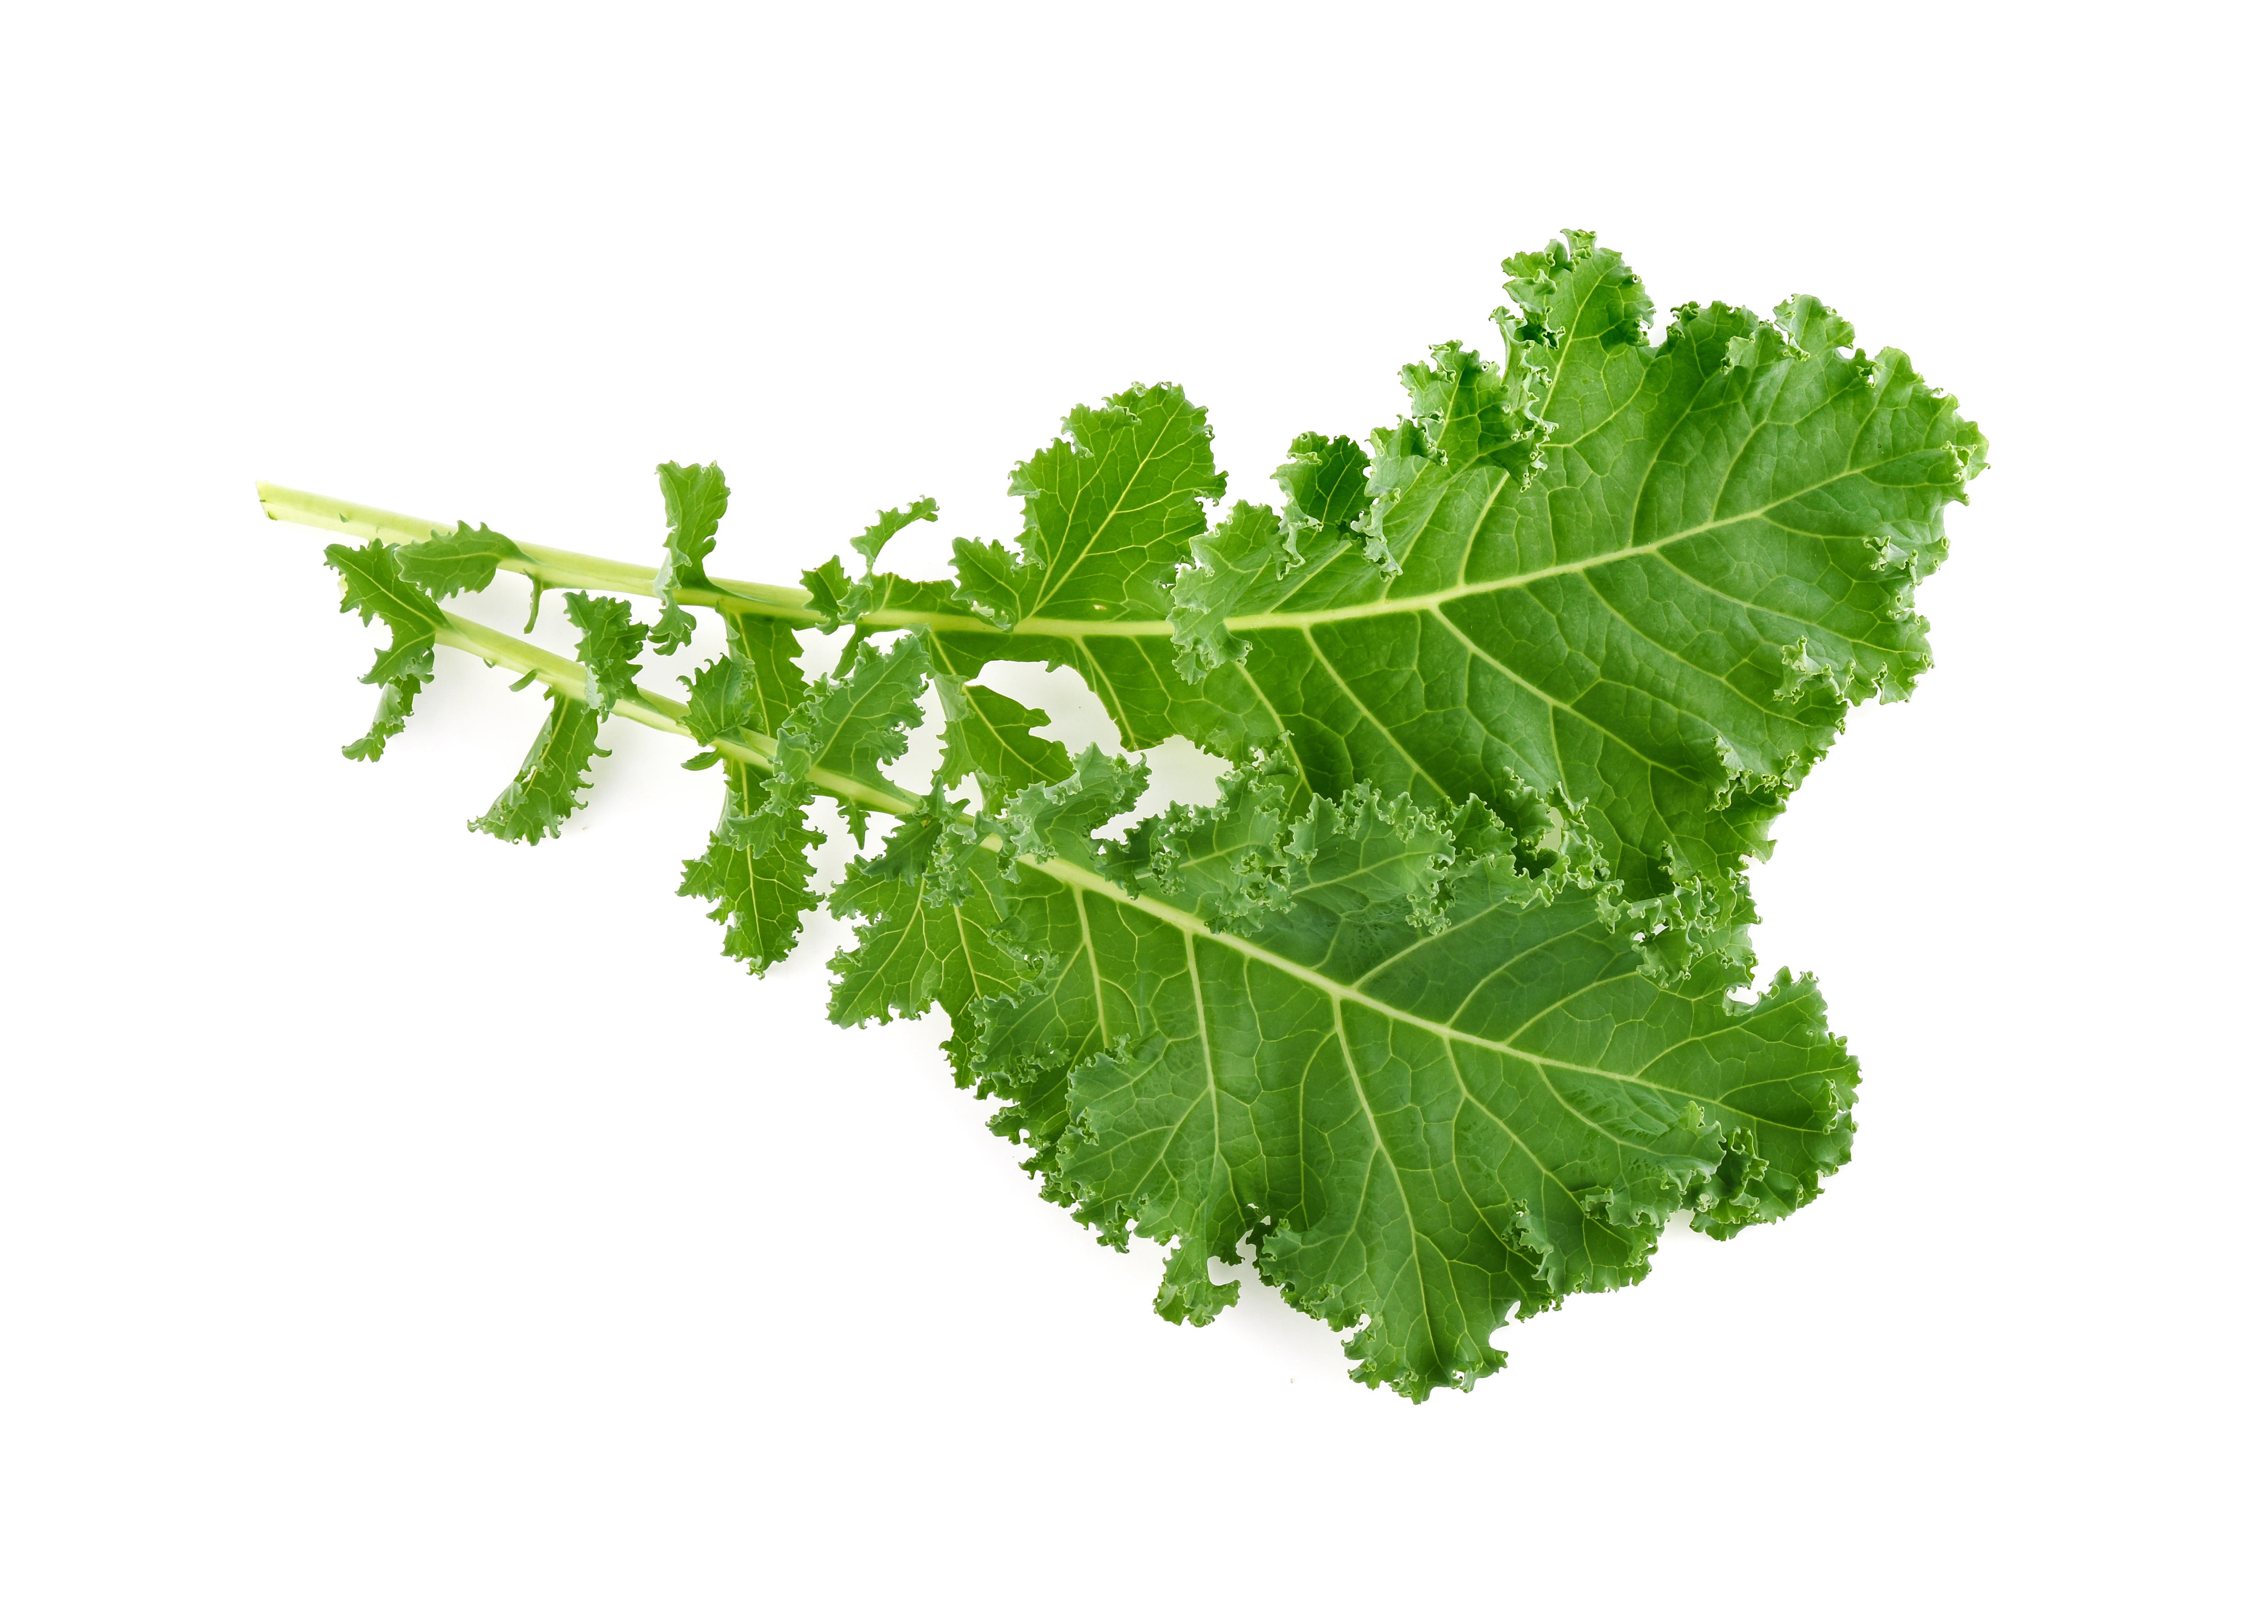 Kale leaves on a white background